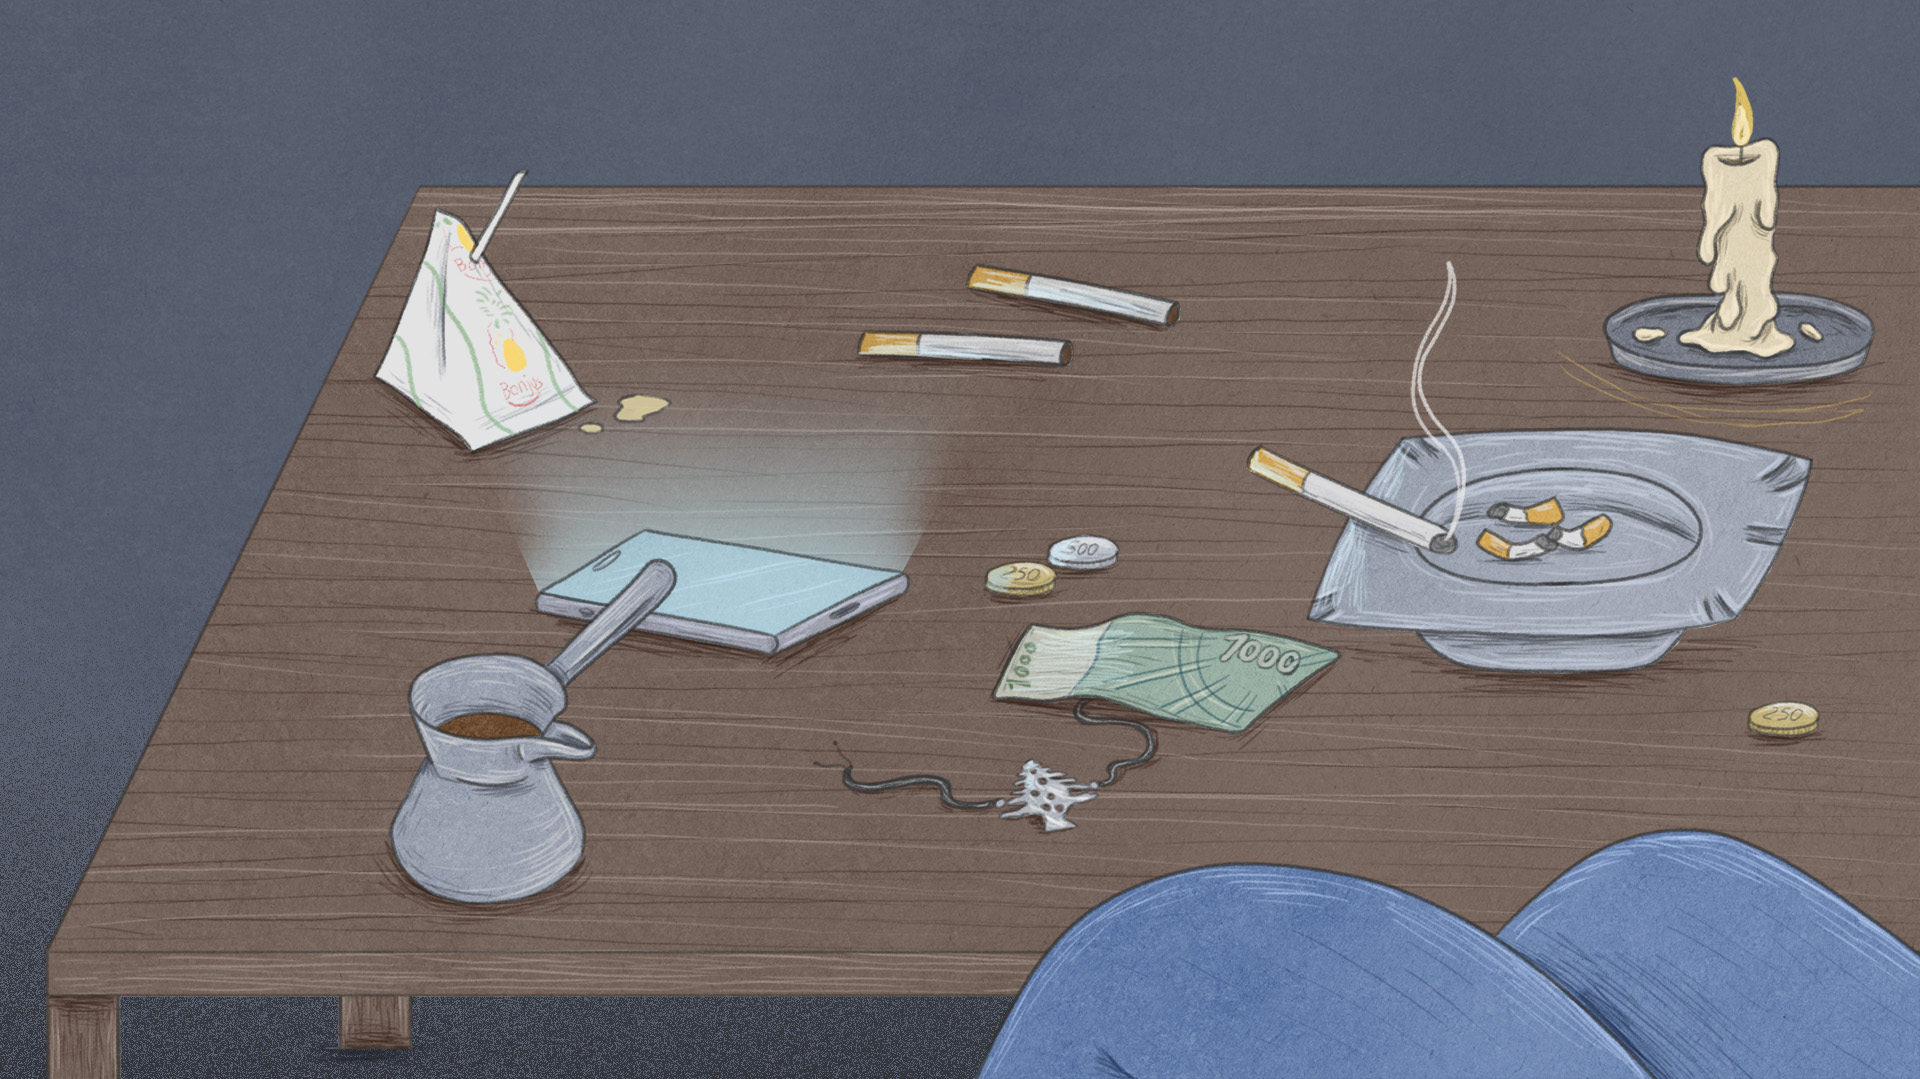 An illustrated scene of a typical table in Beirut, Lebanon with a coffee maker, candle, cigarettes, cedar tree necklace, a 1000 bill, and a phone.